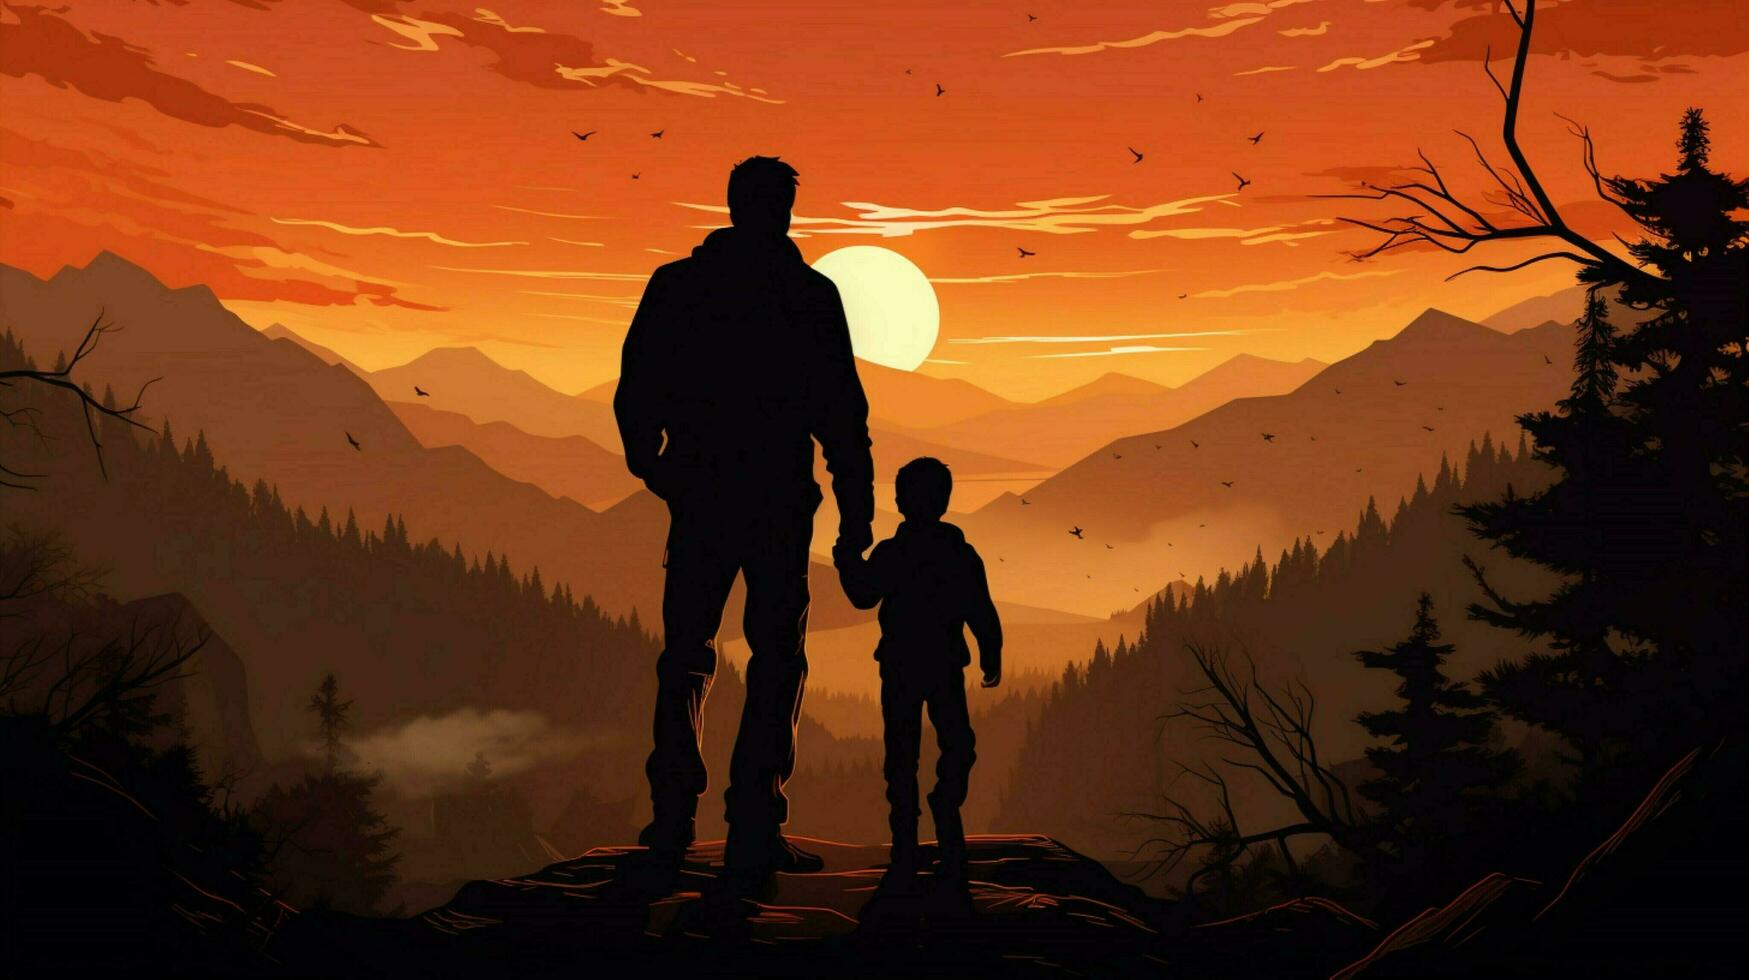 father and son standing in nature silhouette photo